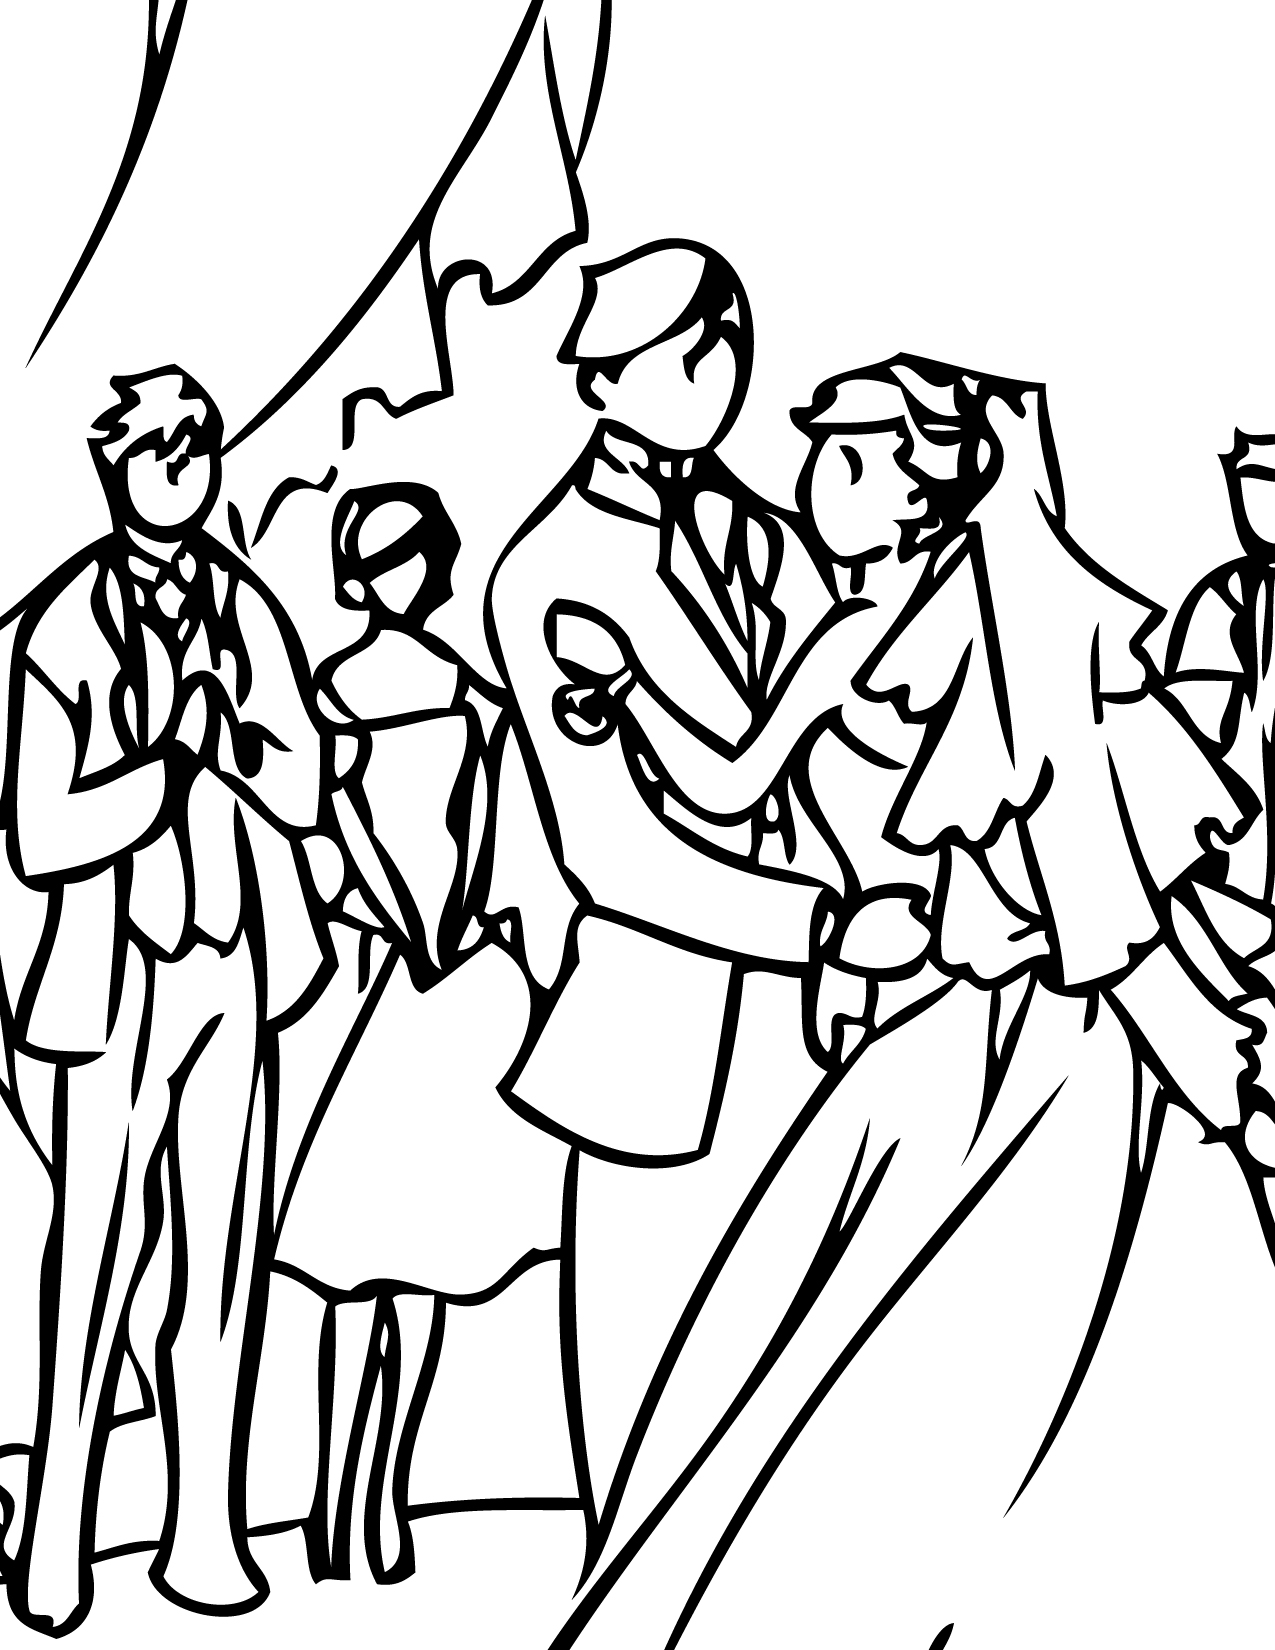 Wedding Coloring Pages - Handipoints